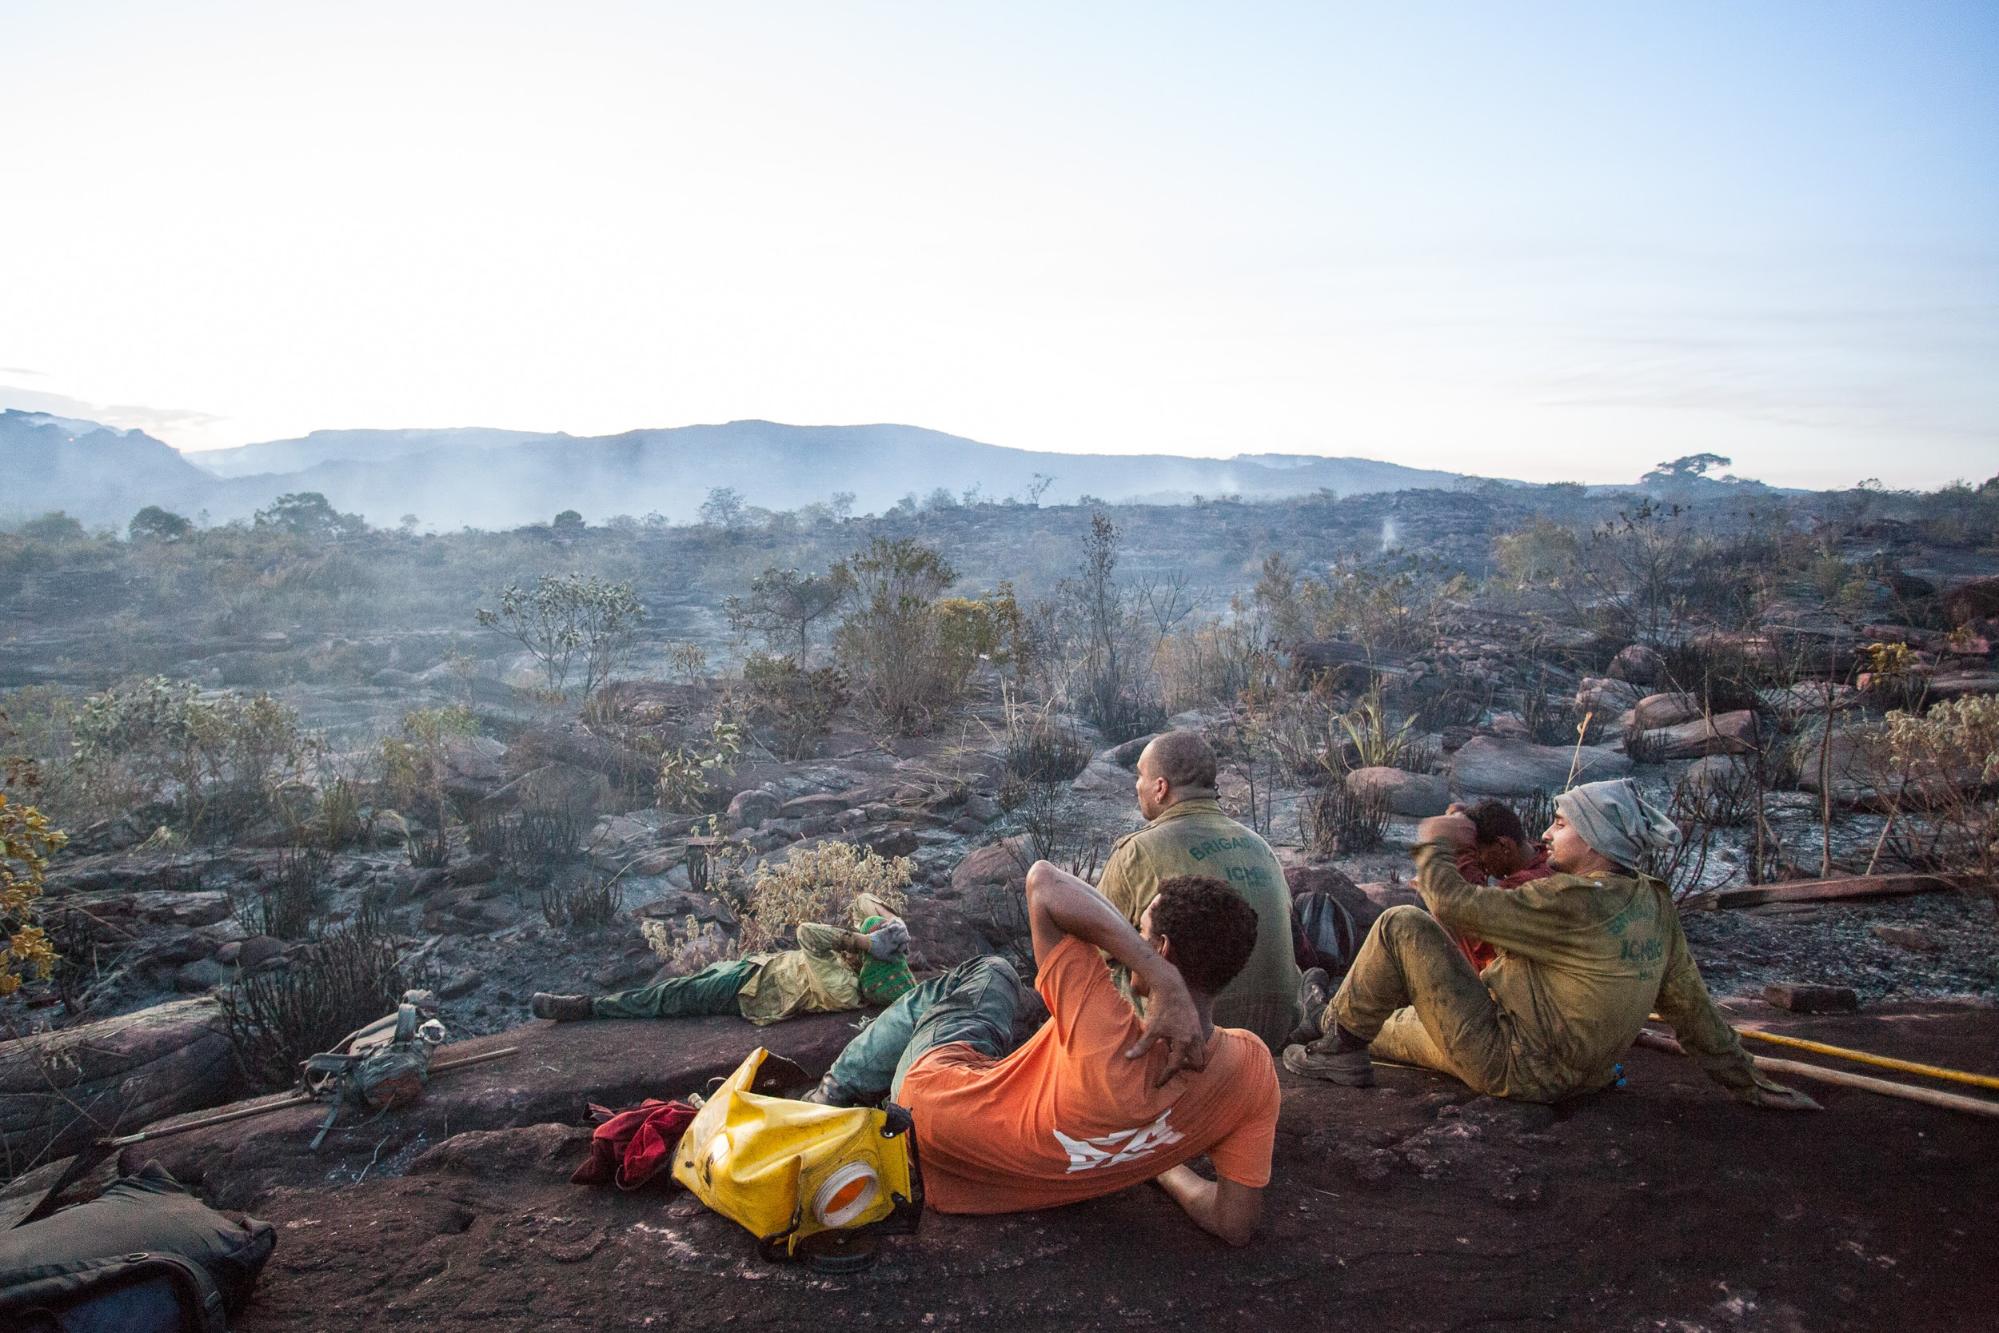 Brigadistas take a break after putting out a fire, waiting to see whether it will start up again. Photo by Açony Santos